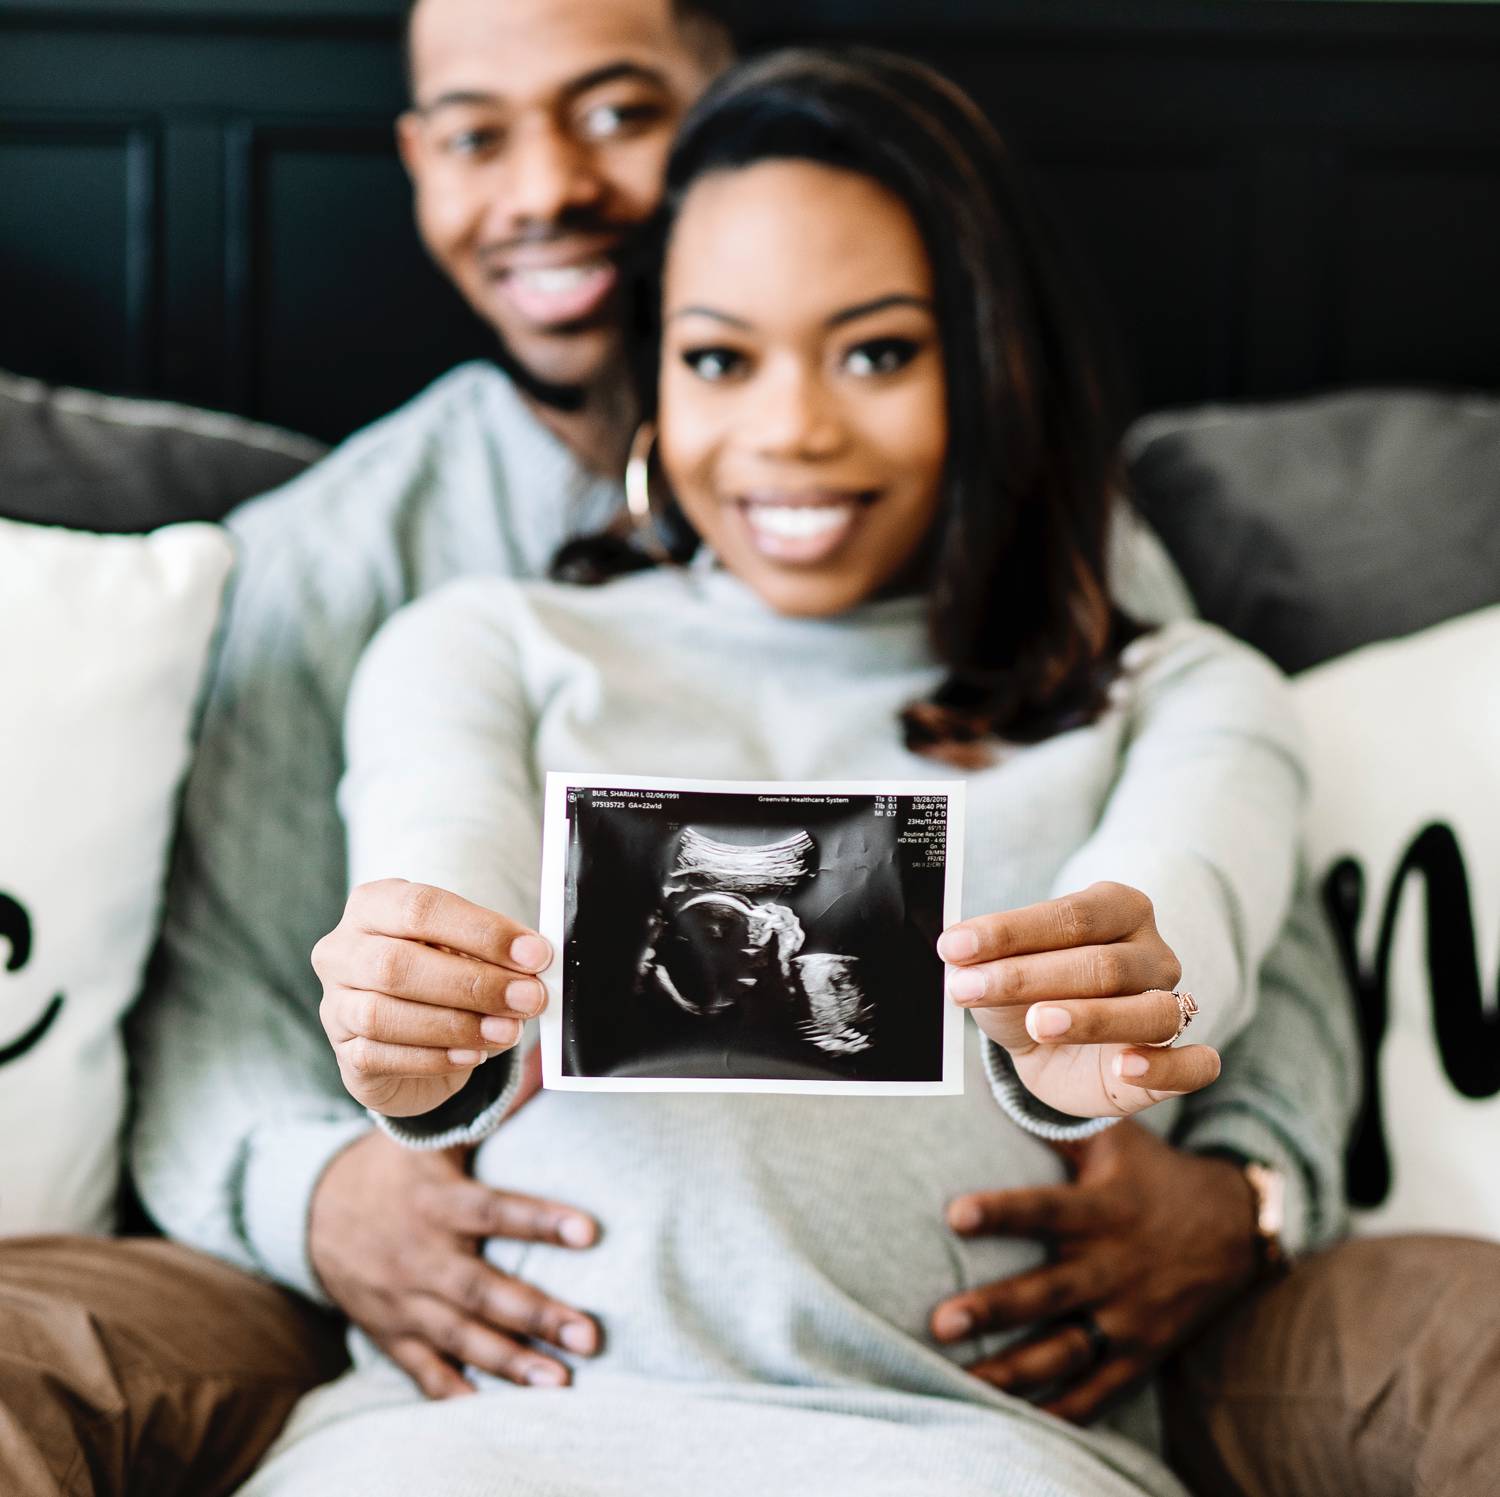 Sasha Q. Photography's maternity posing is simple and fun, like this shot with the parents showing off their sonogram photo.